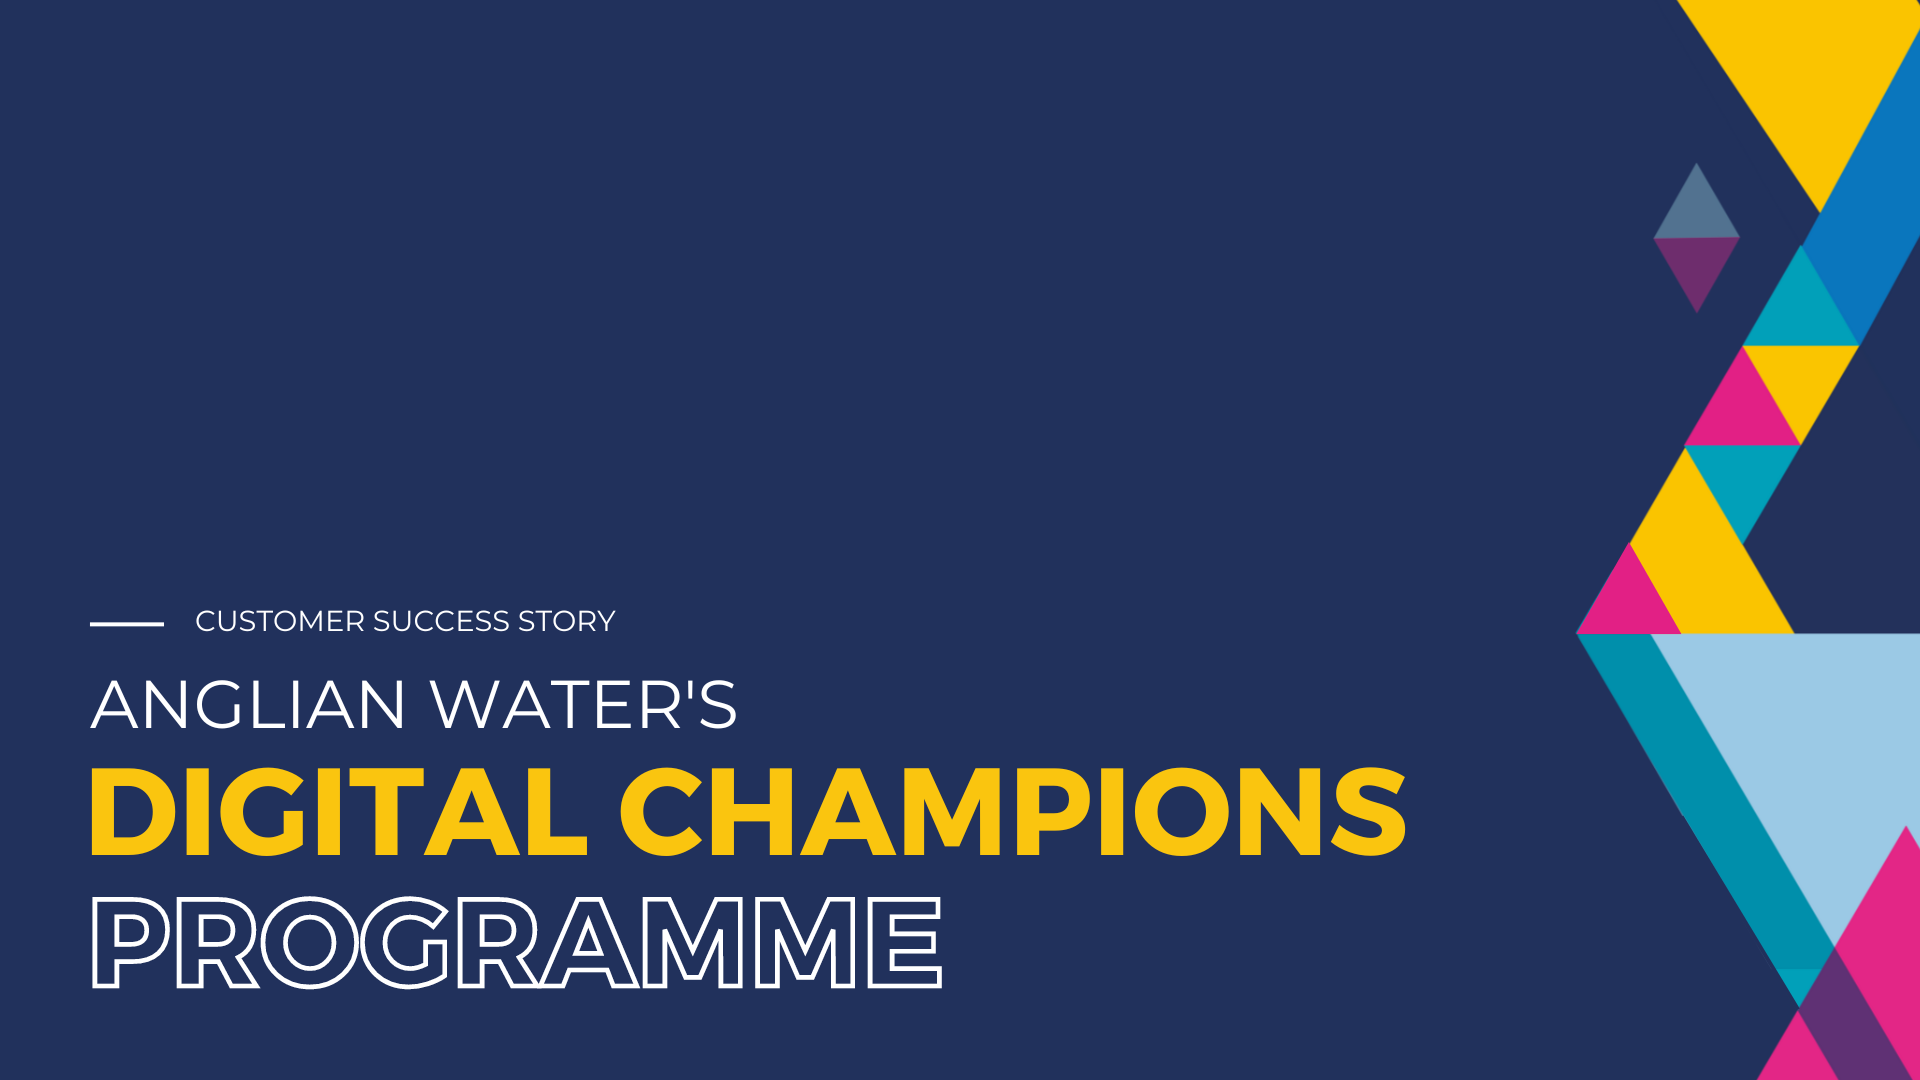 Angial Water Digital Champions Video Testimonial Thumbnail With Text & Colourful Shapes